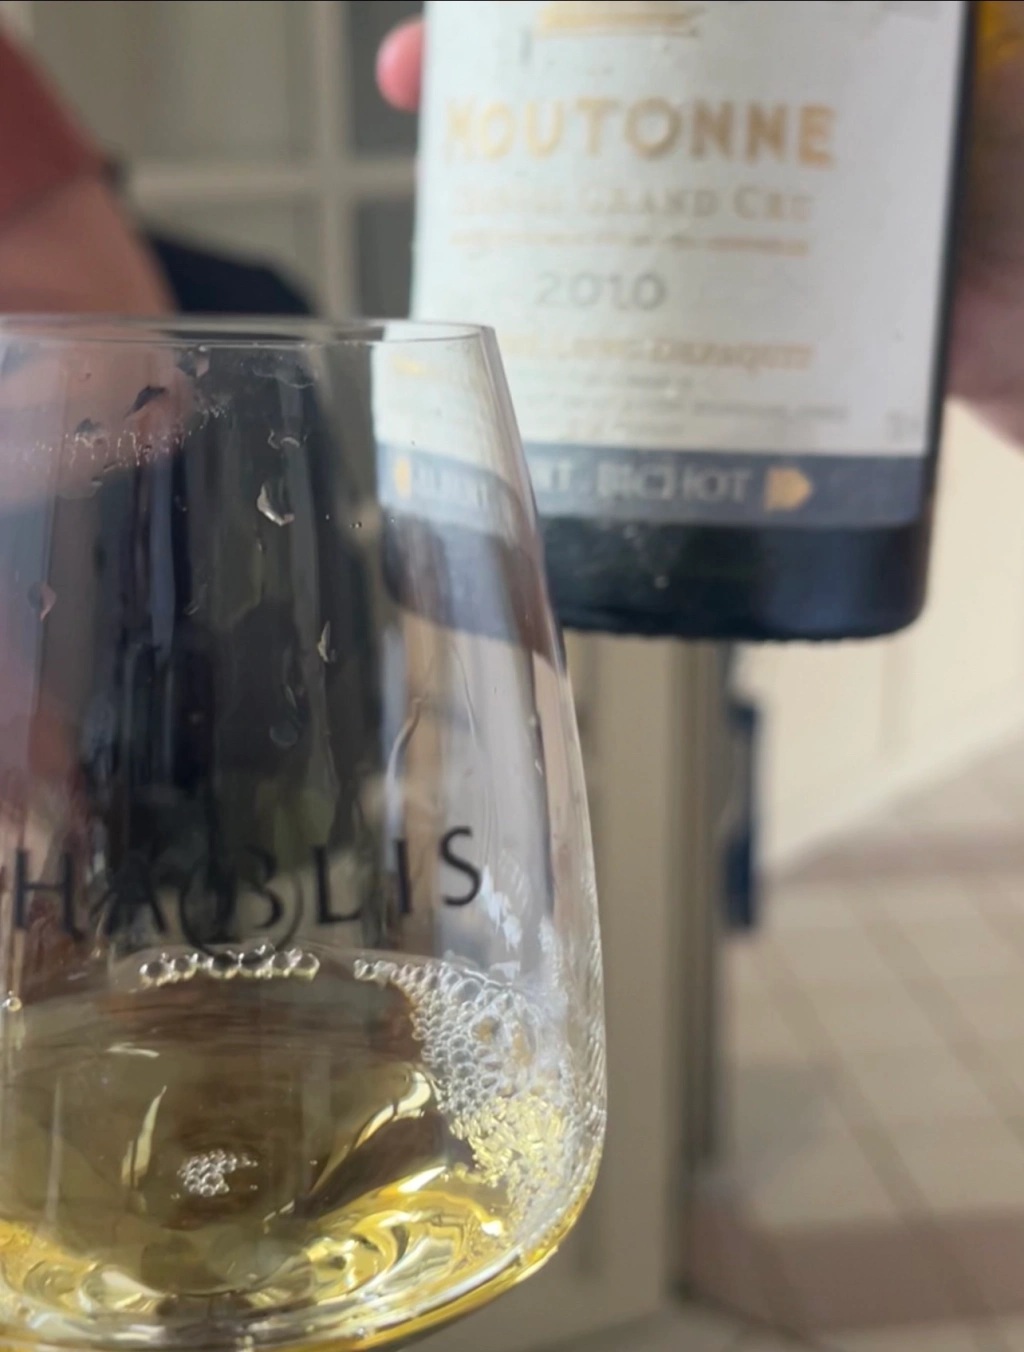 Streets & Eats of Day Three in Chablis